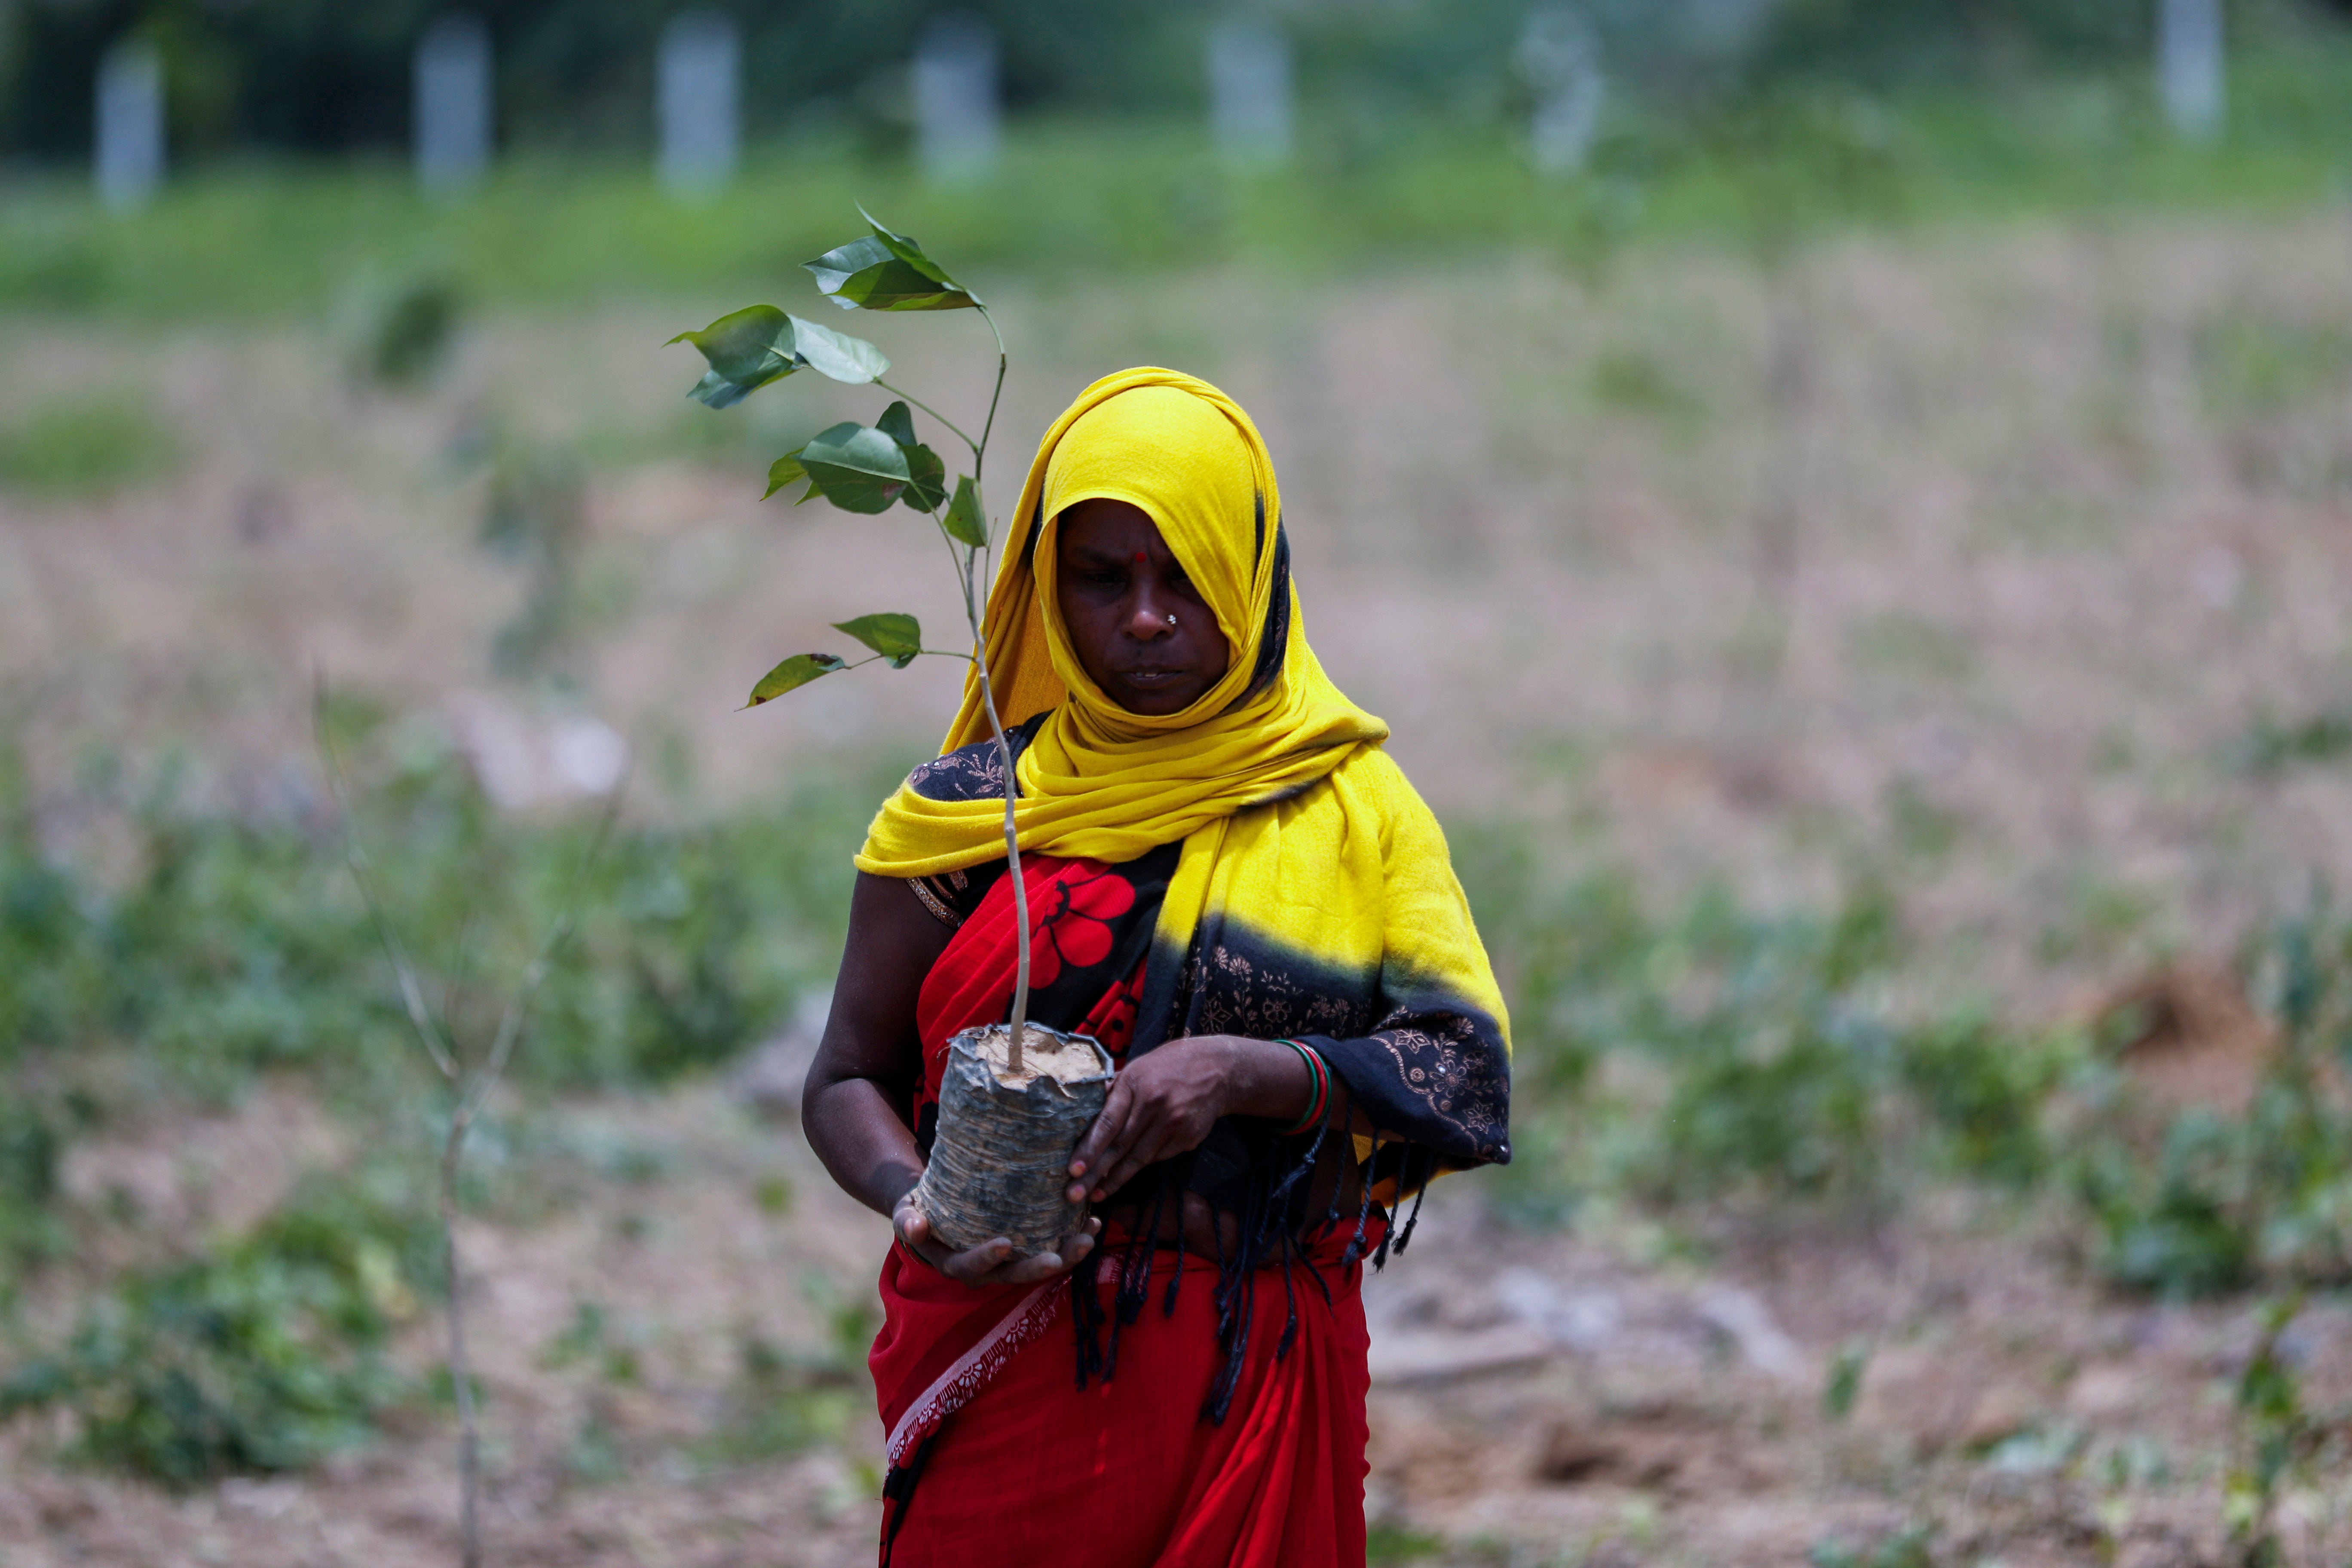 A labourer prepares to plant saplings for an annual tree plantation campaign on the outskirts of Prayagraj in northern Uttar Pradesh state, India